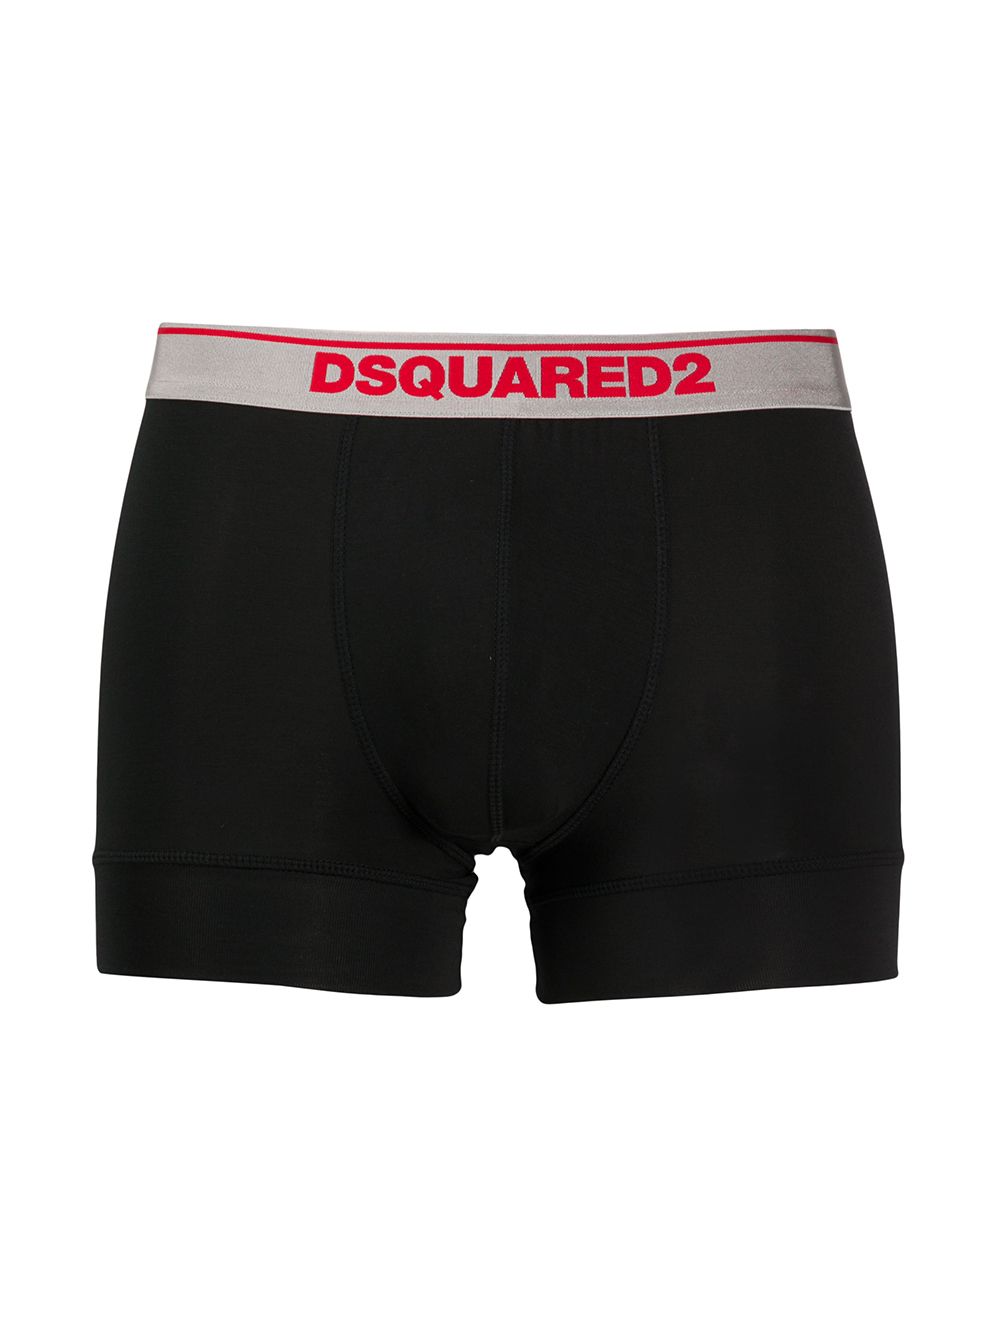  Dsquared2 Logo Boxers Two-pack - Black 